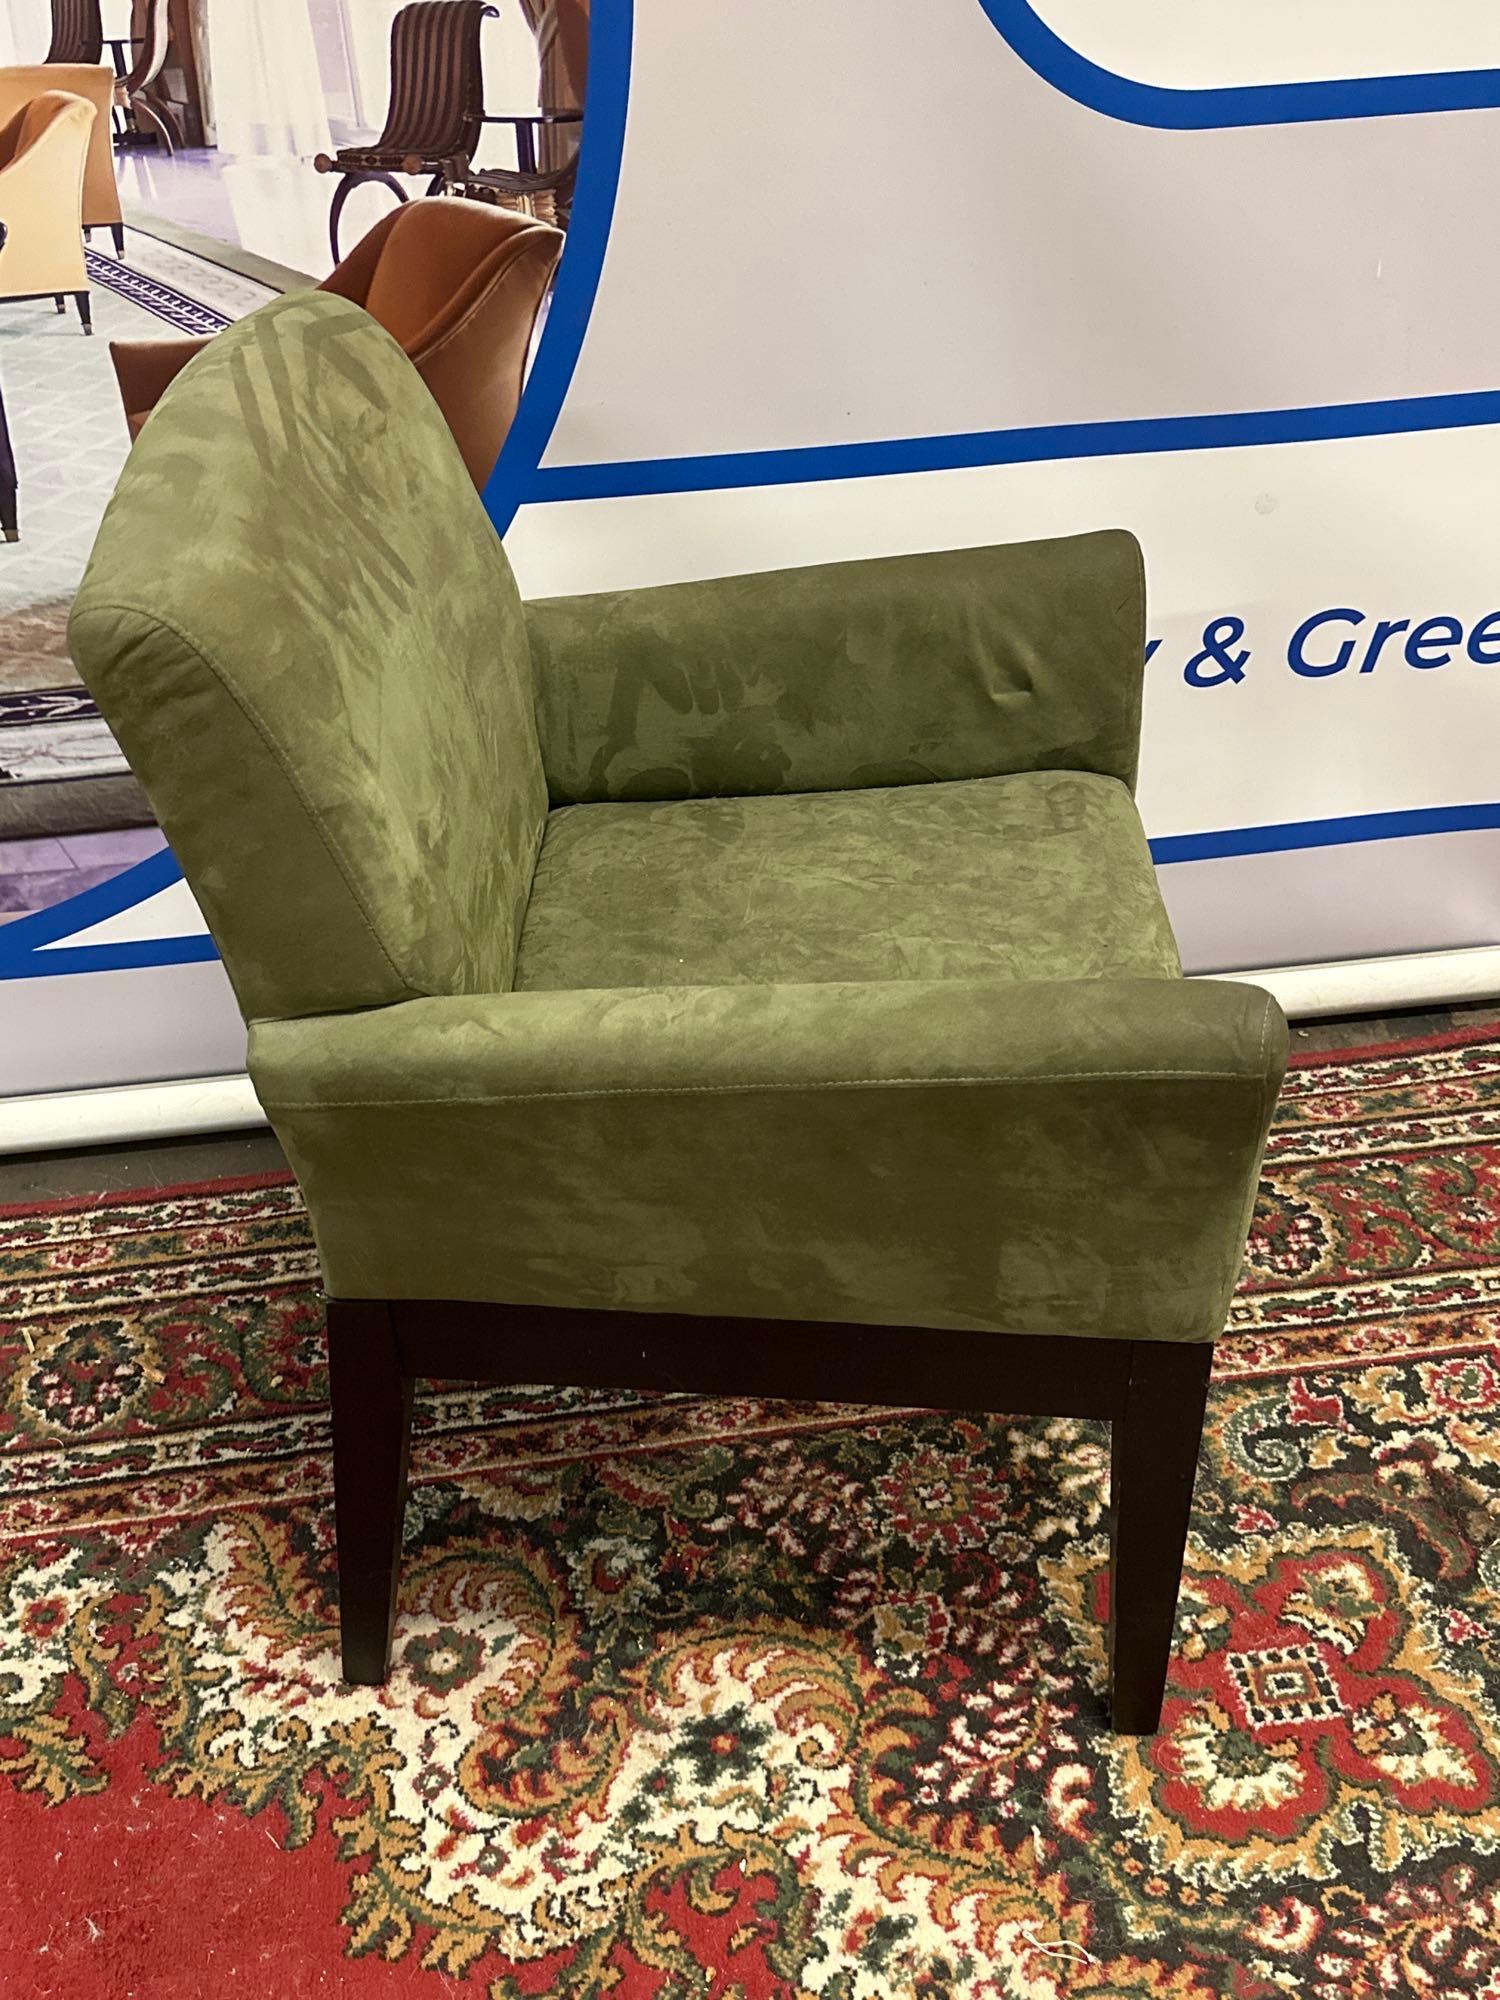 Accent Chair Upholstered In A Green Suede Fabric On Dark Wooden Frame 64 x 55 x 87cm - Image 2 of 5